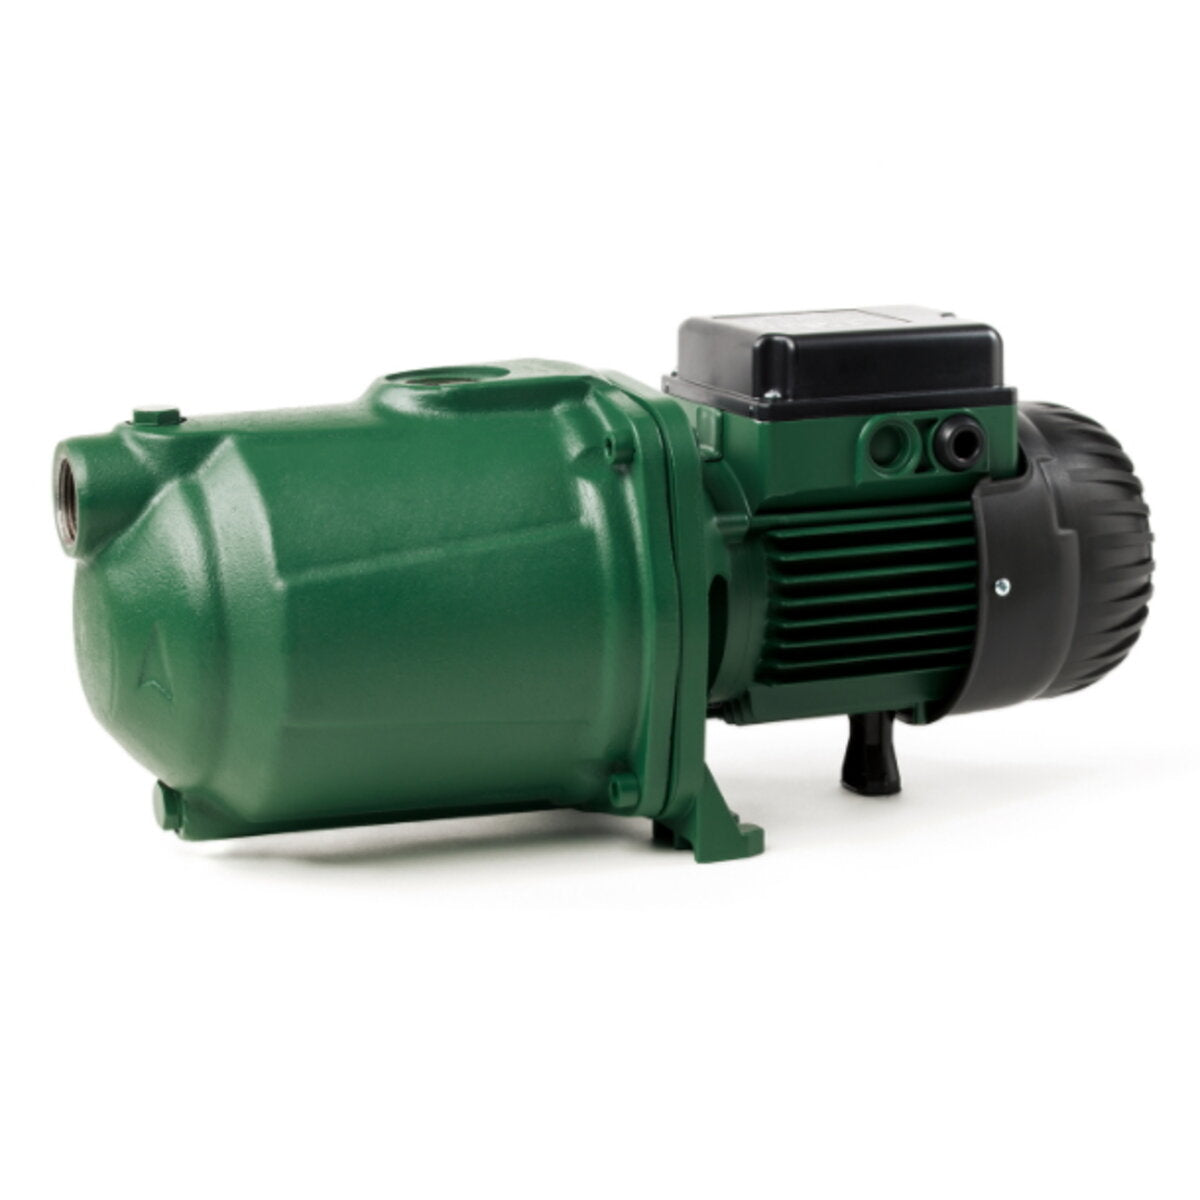 DAB EURO 40/50 M IE2 single-phase multistage centrifugal electric pump